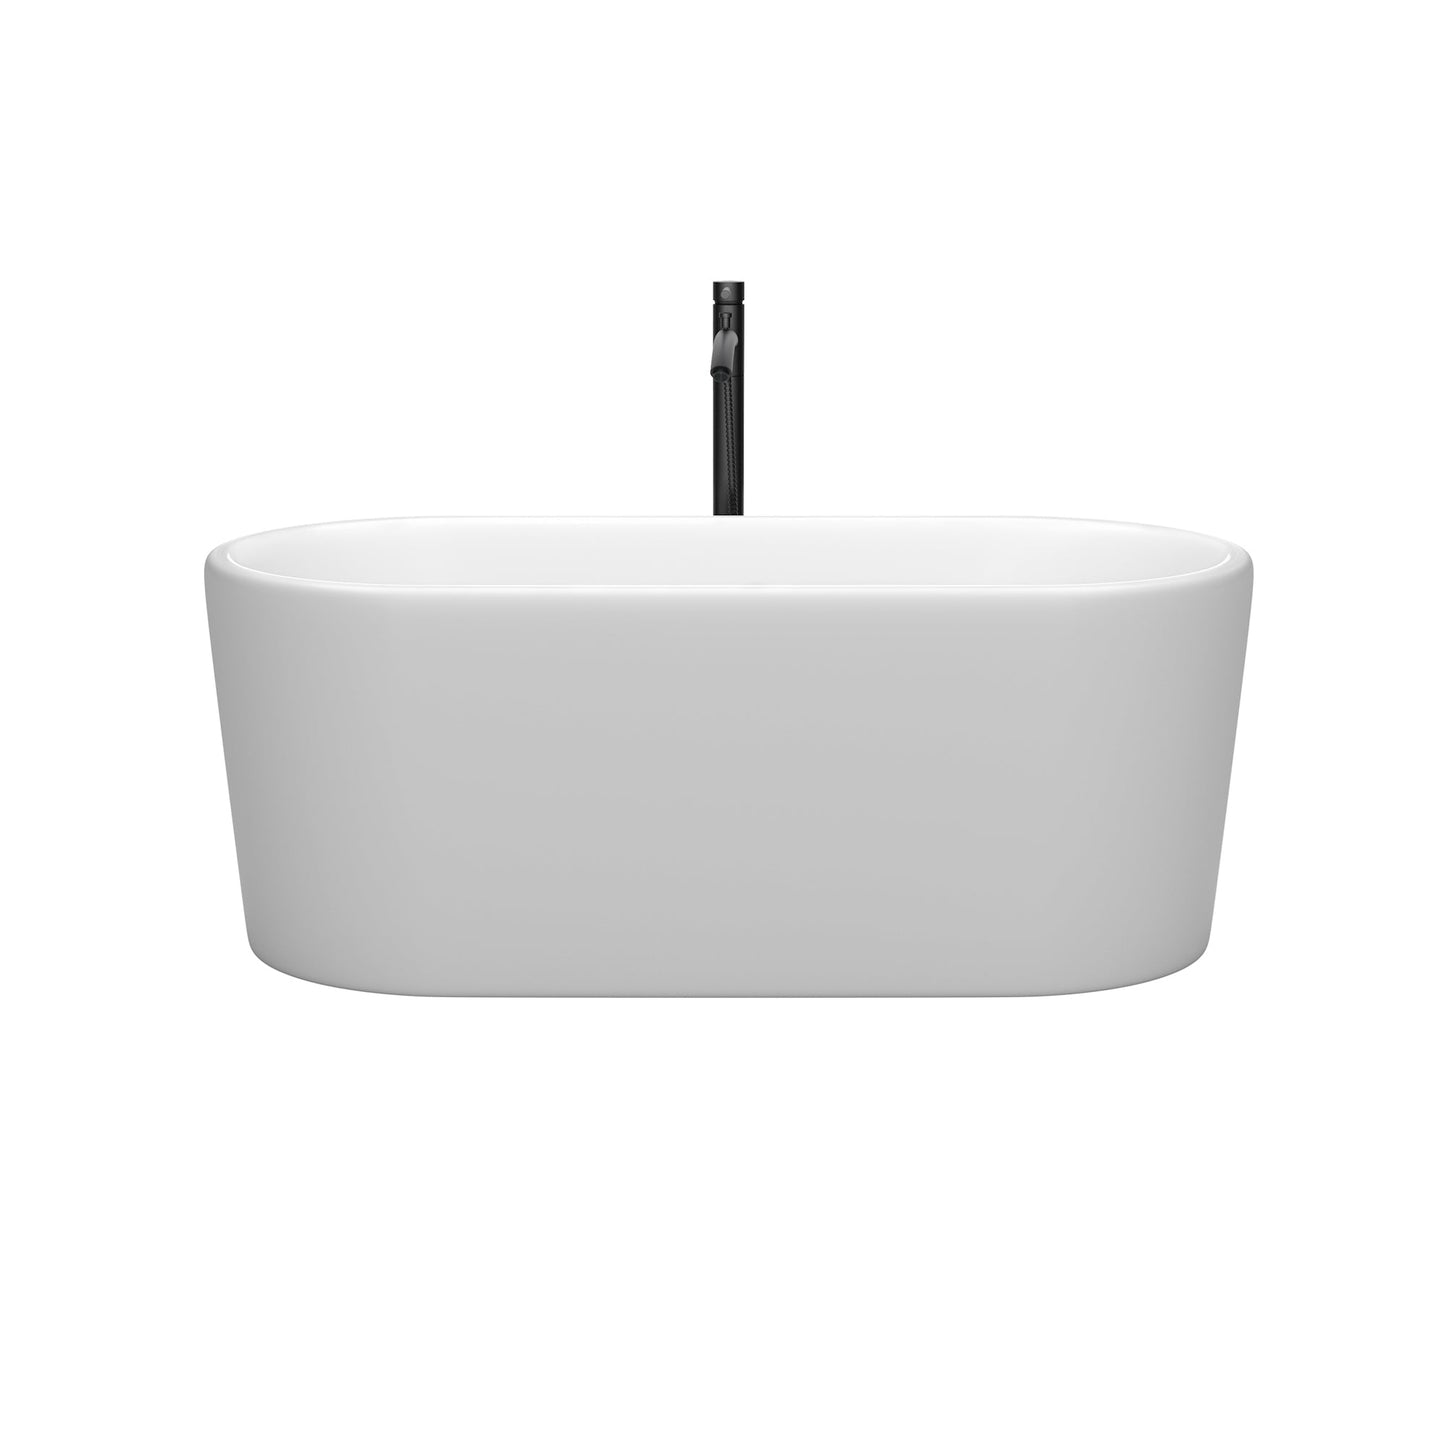 Wyndham Collection Ursula 59" Freestanding Bathtub in Matte White With Polished Chrome Trim and Floor Mounted Faucet in Matte Black